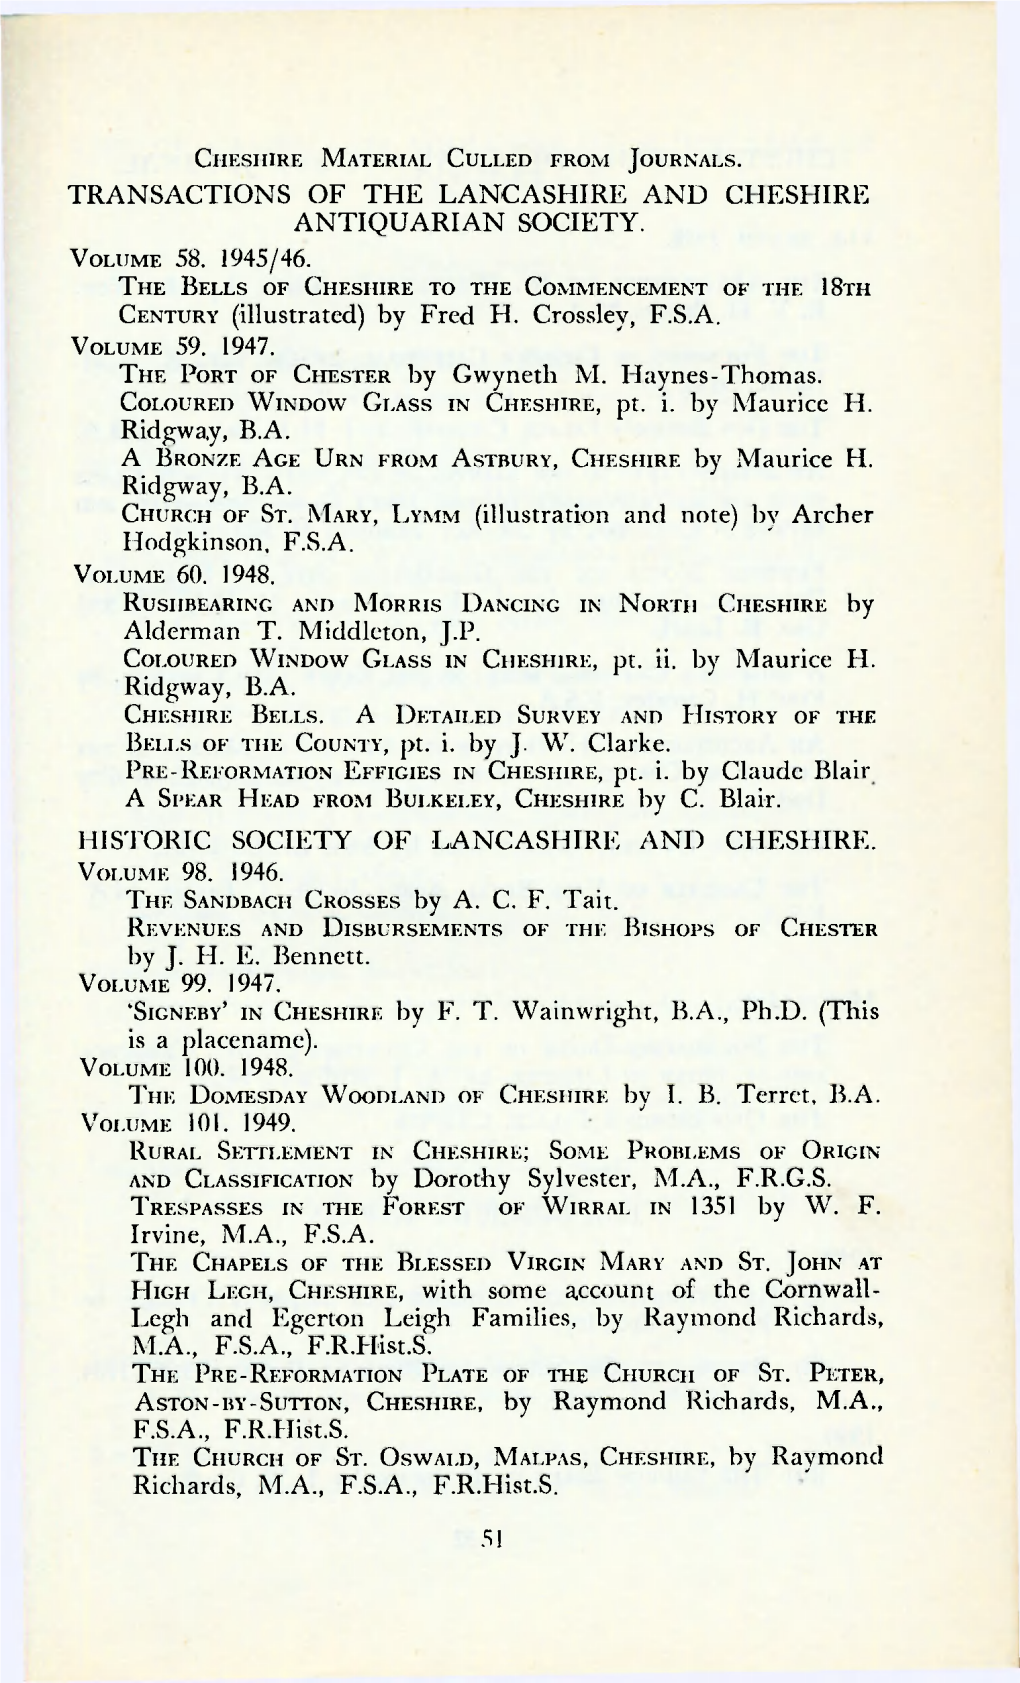 TRANSACTIONS of the LANCASHIRE and CHESHIRE ANTIQUARIAN SOCIETY. CENTURY (Illustrated) by Fred H. Crossley, F.S.A. by Gwyneth M